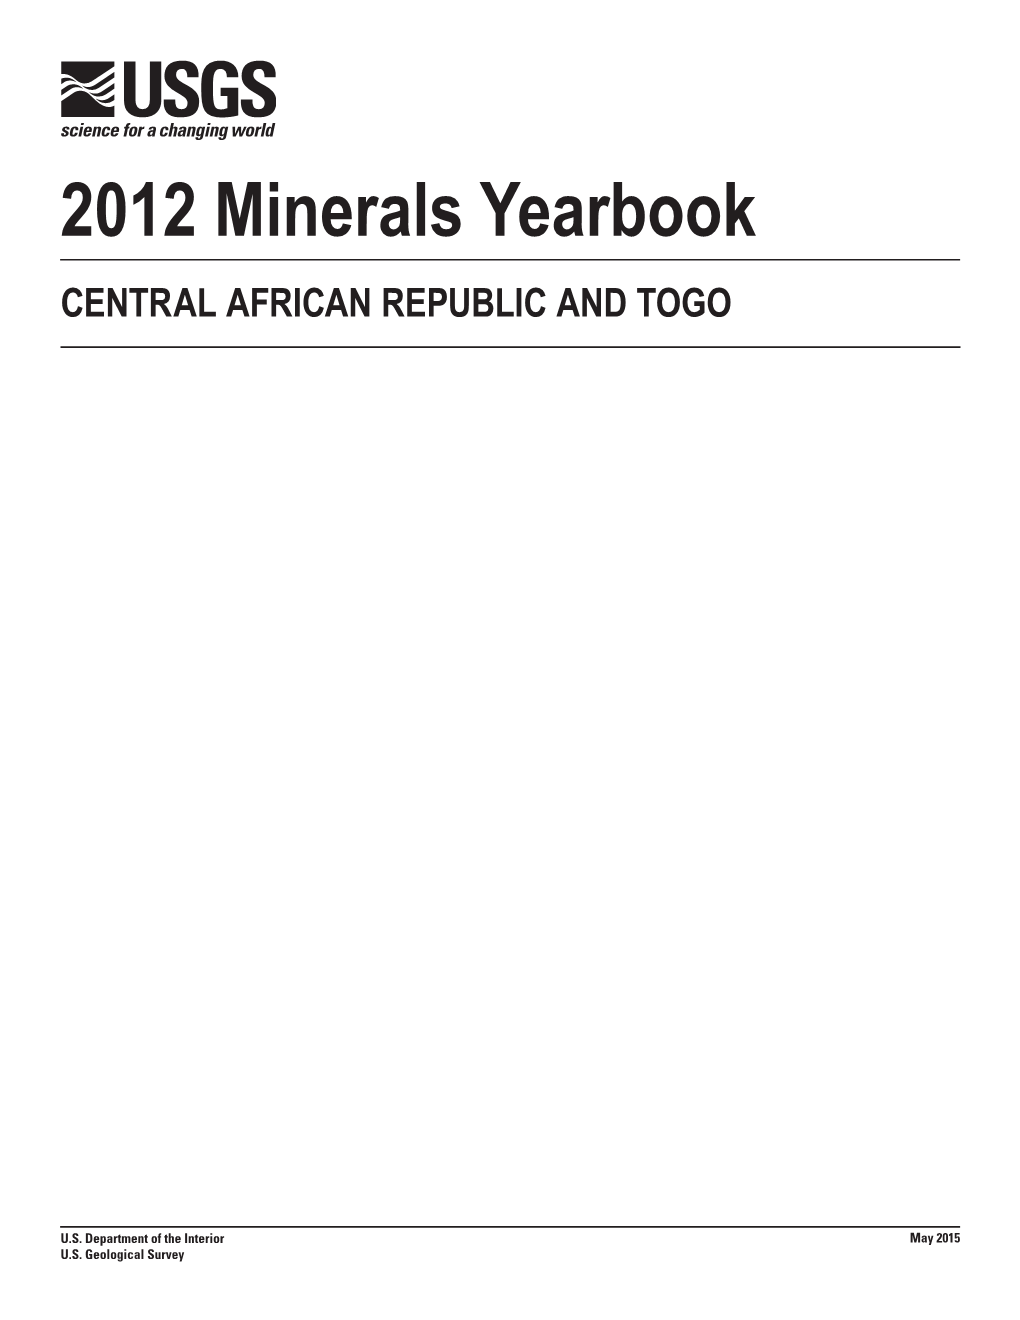 The Mineral Industries of Central African Republic and Togo in 2012